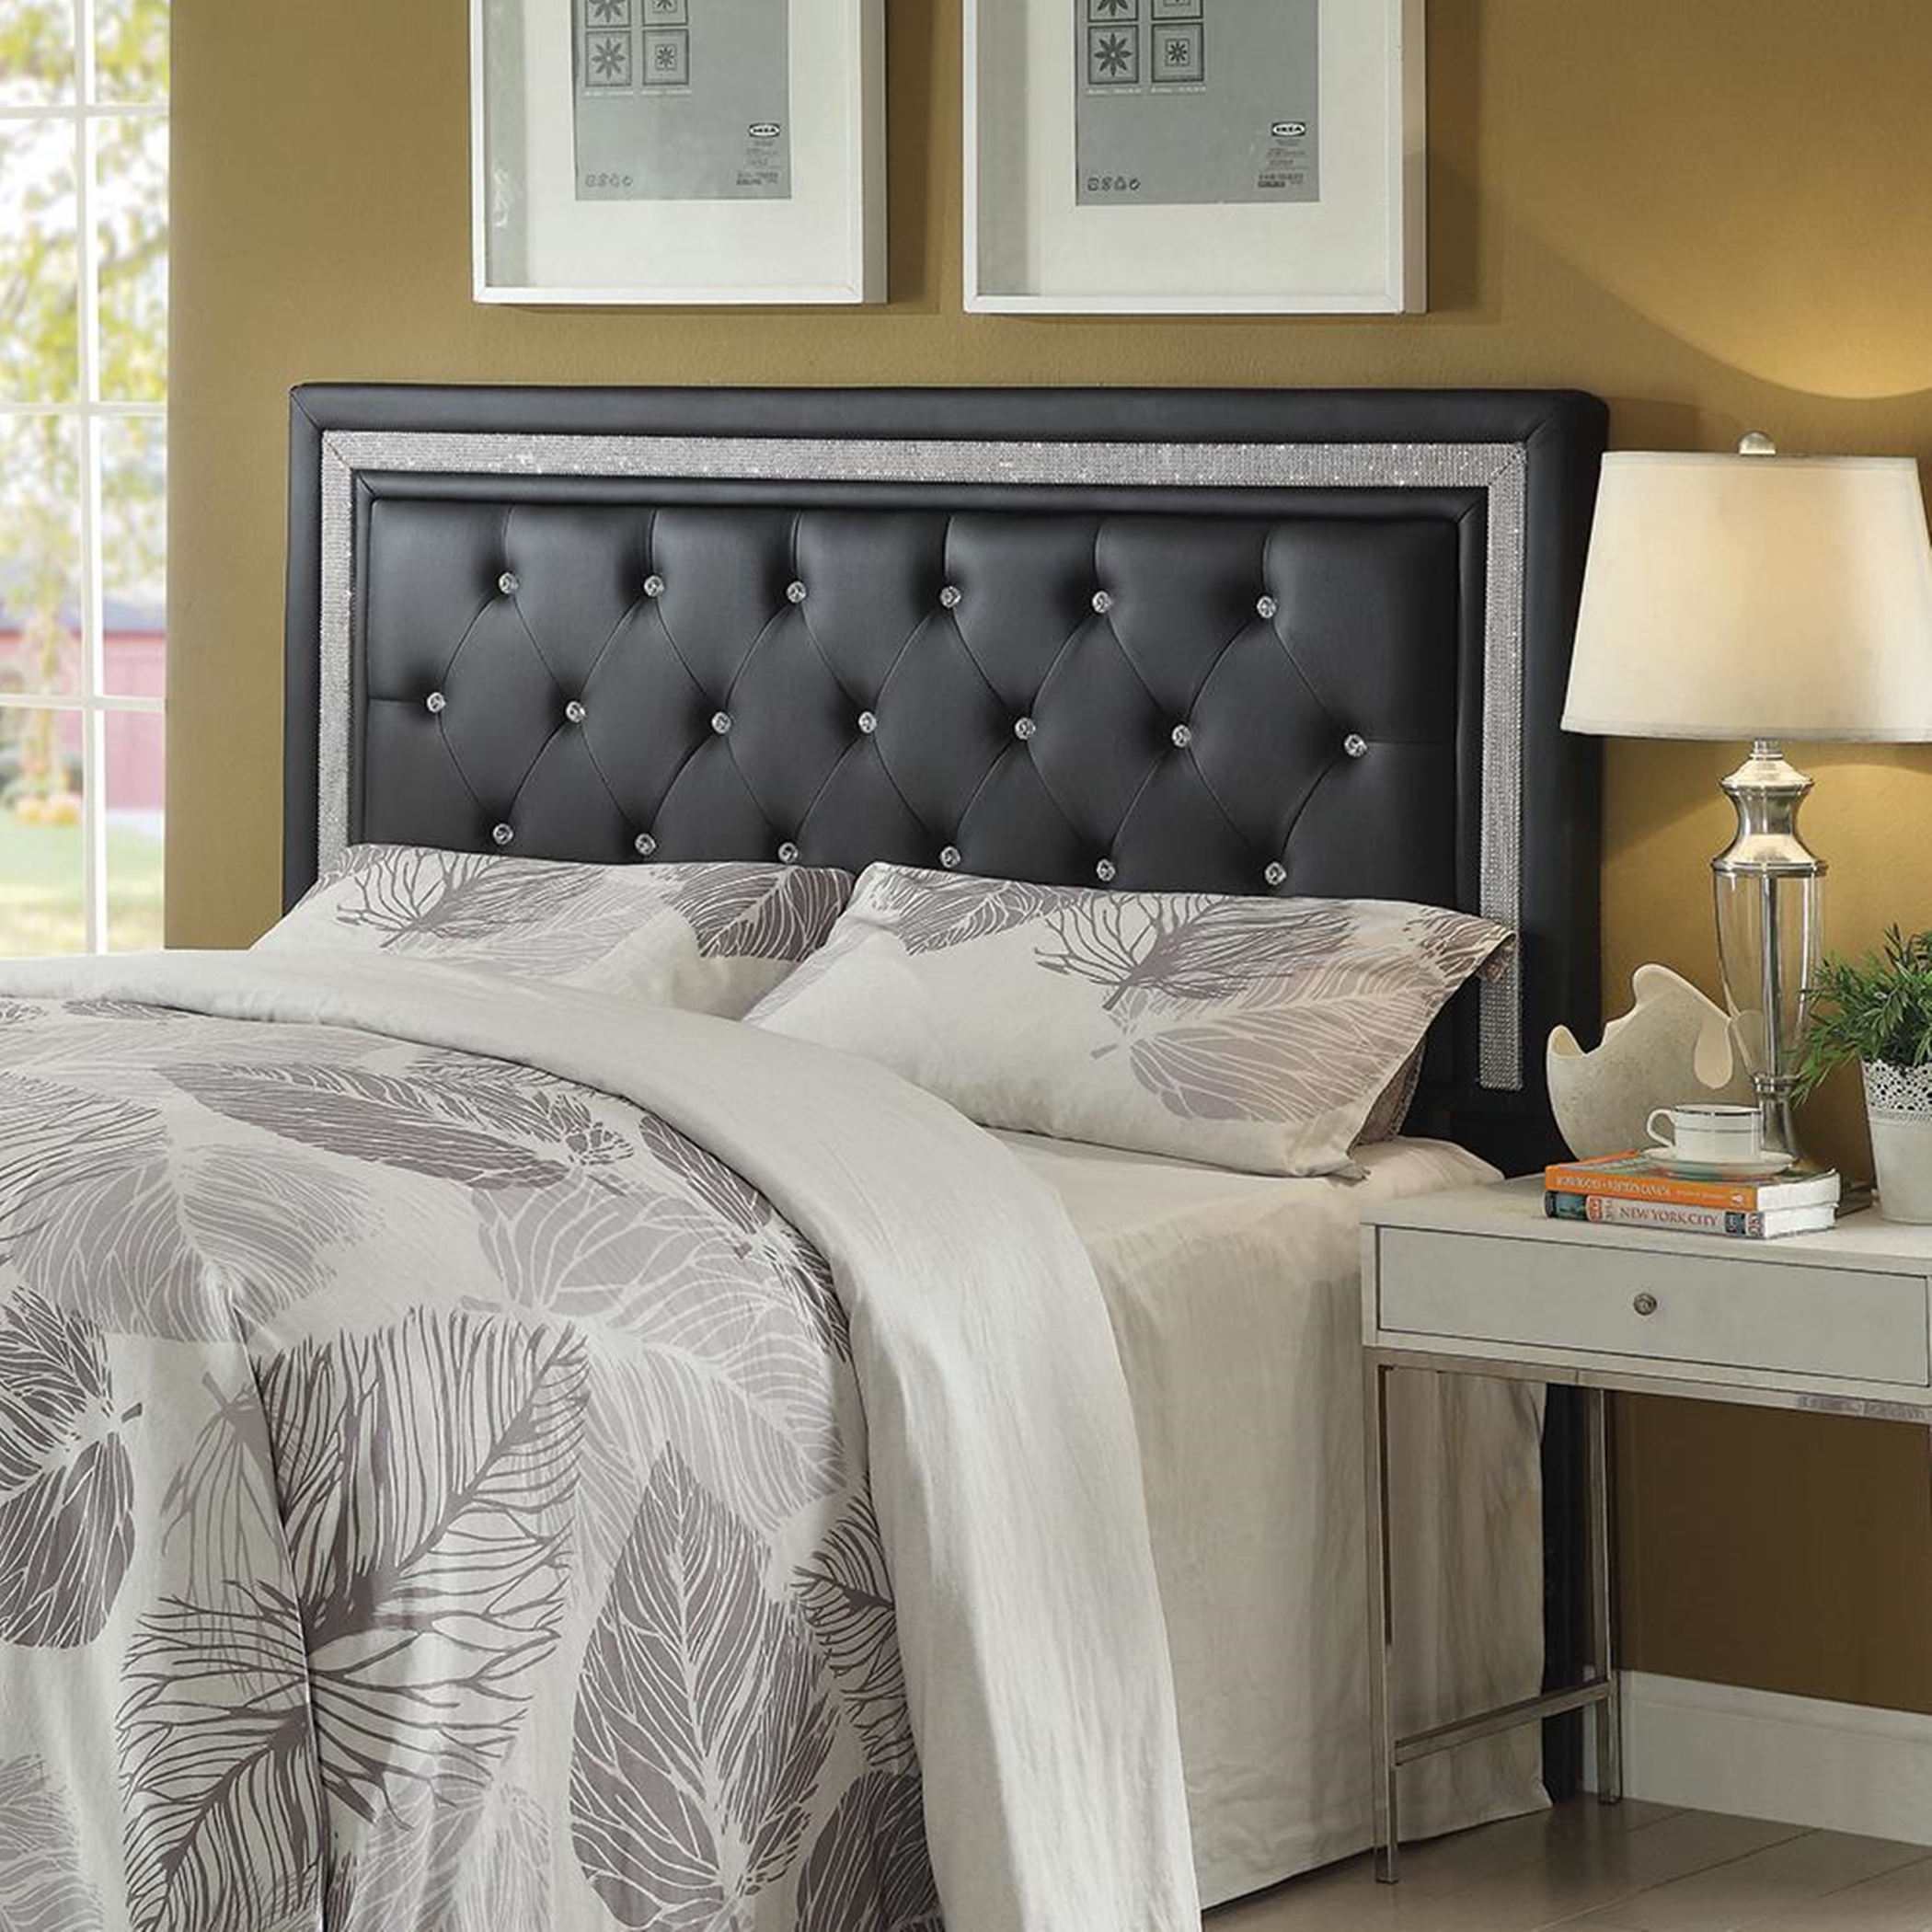 Andenne Q/F Headboard - Click Image to Close